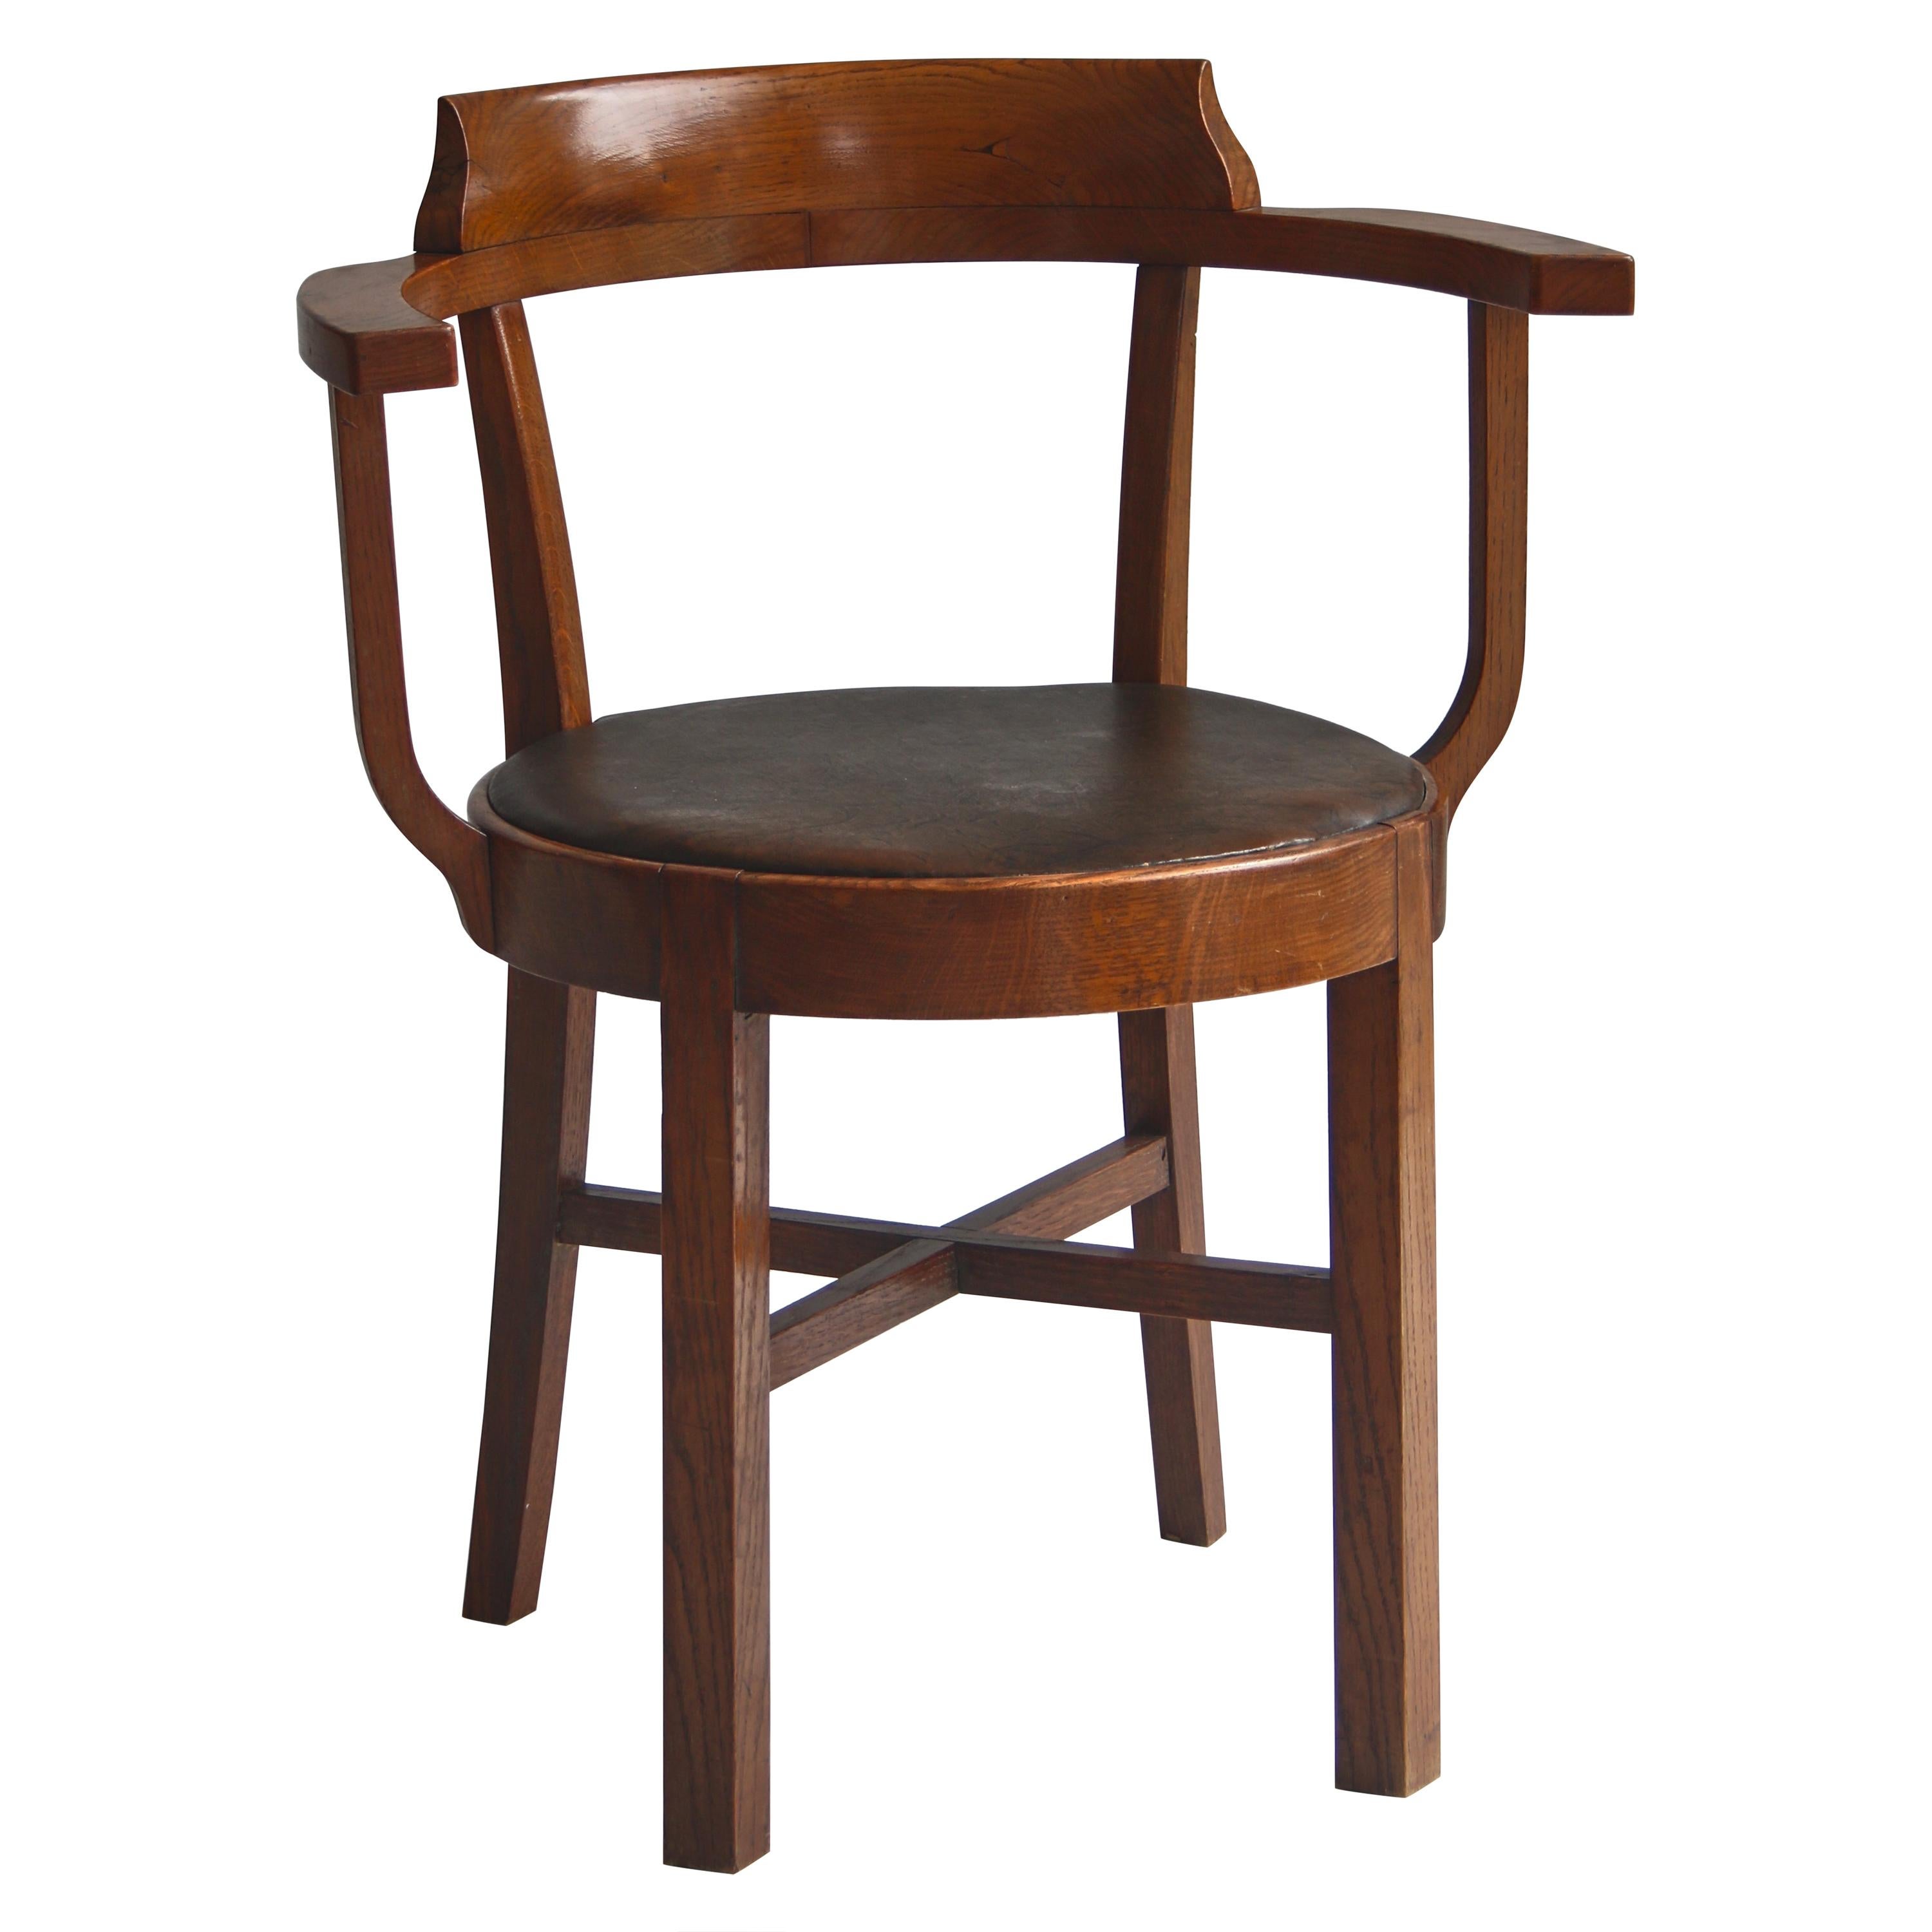 Early Modern Danish Cabinetmaker "Captains Chair" in Patinated Oak